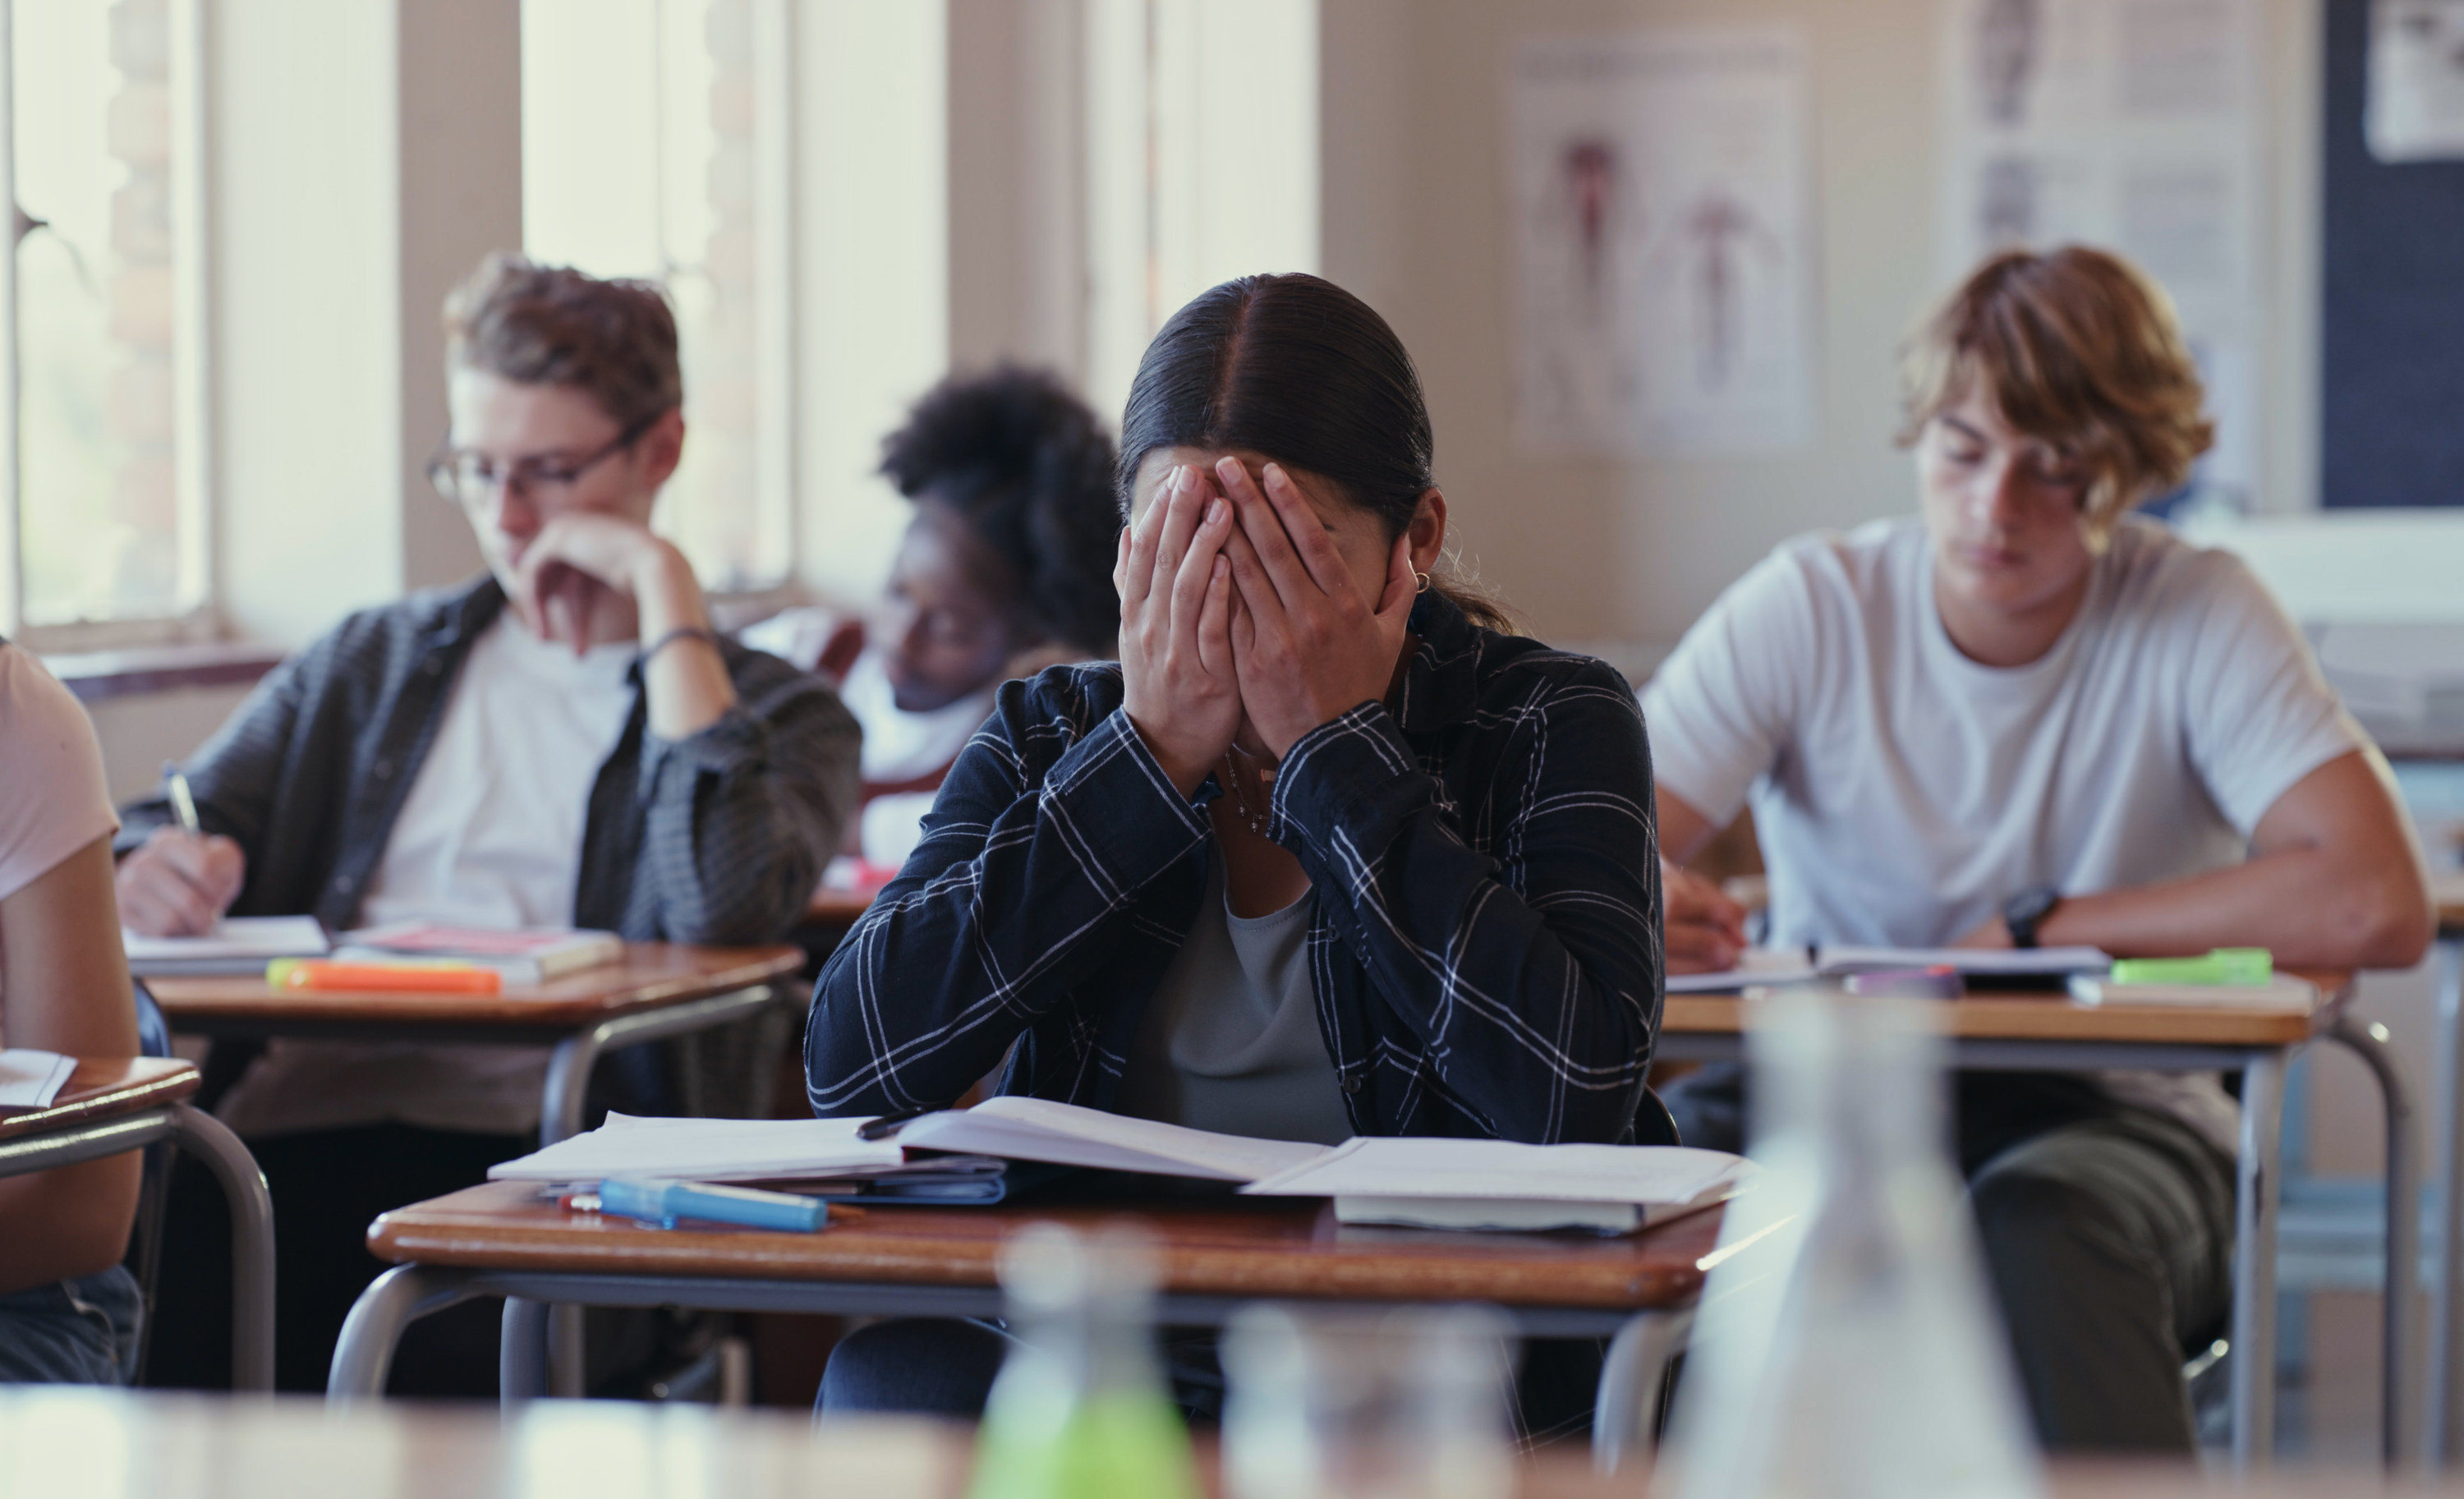 Stressed student in class with their hands over their face